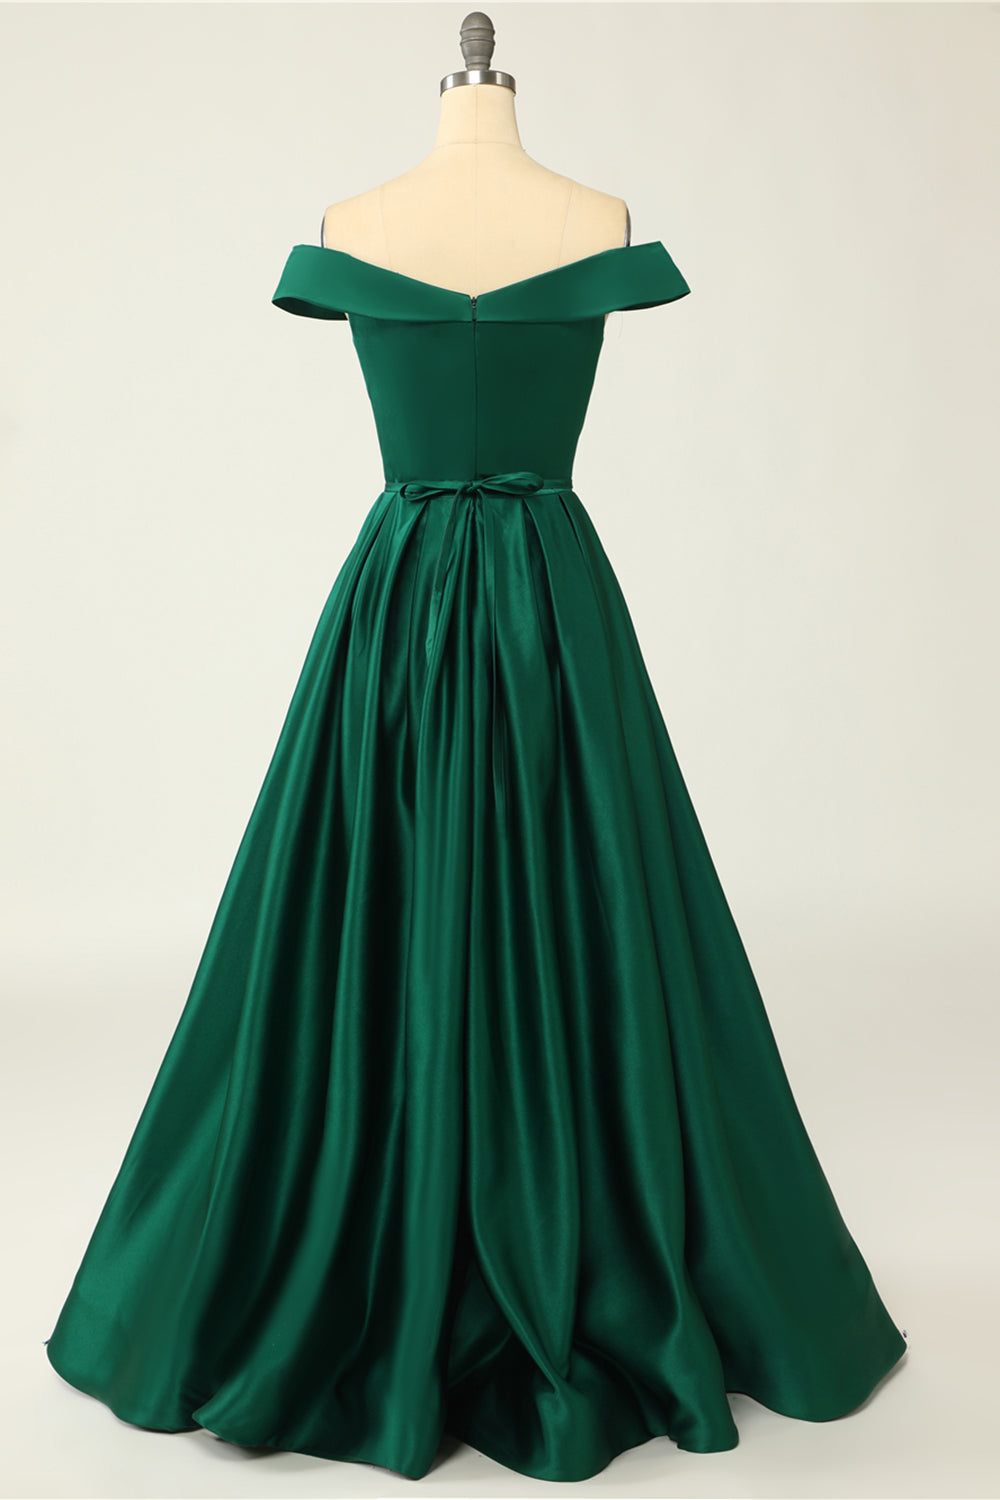 Zapakasa Women Green Off the Shoulder Satin A-line Prom Dress with